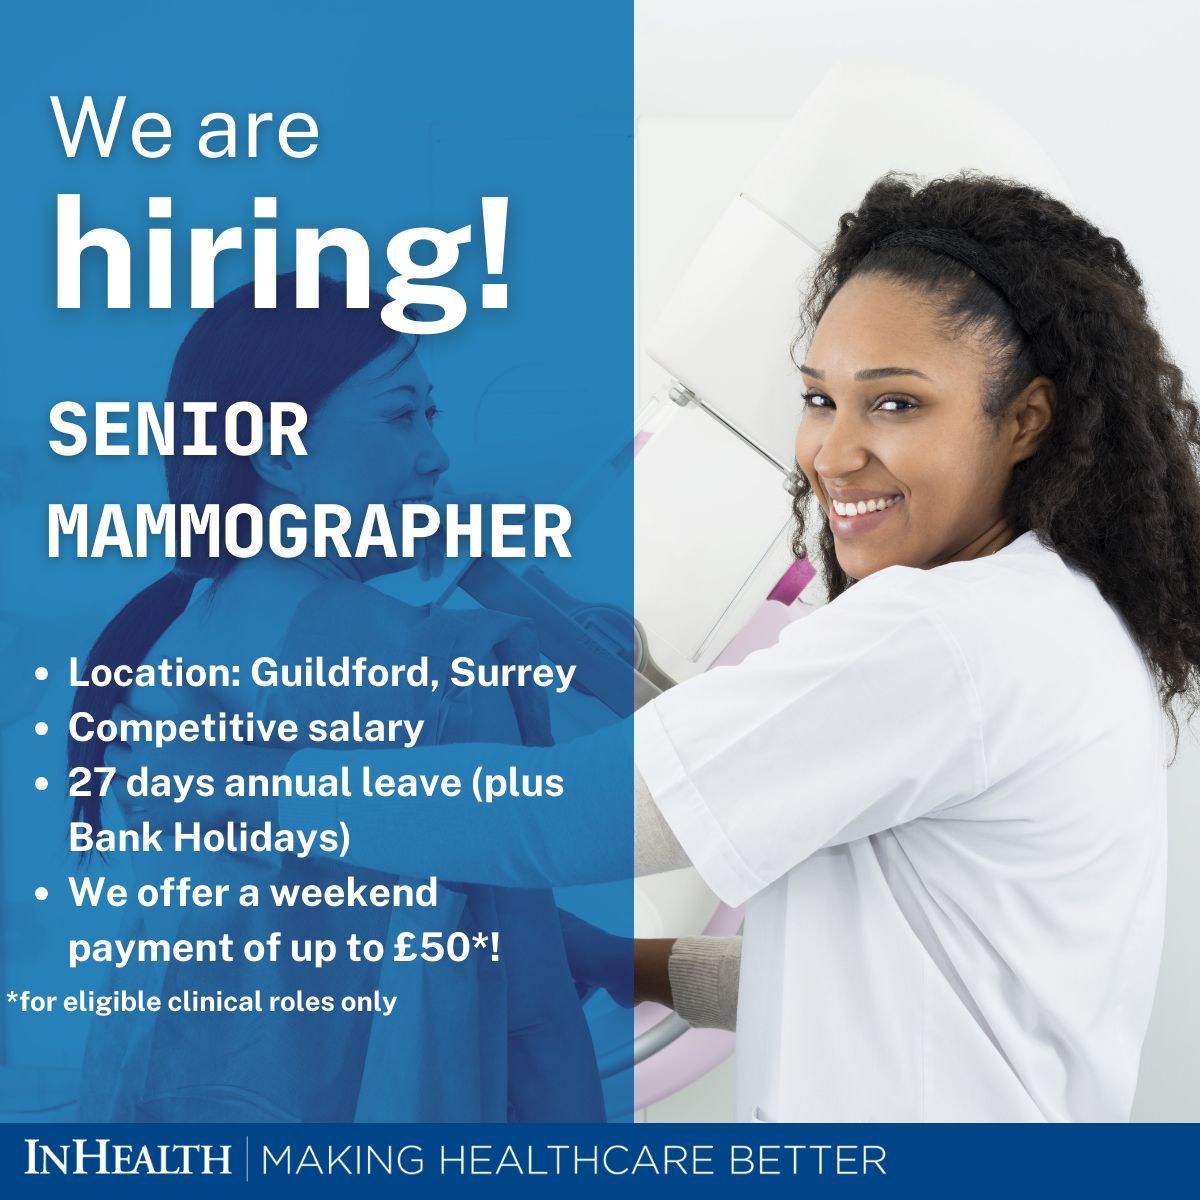 We are hiring for a Senior Mammographer! Do you have a passion for making healthcare better? Apply today and do just that. With flexible working, a competitive salary and generous pension, there’s never been a better time to join buff.ly/4aSUFCD #Hiring #WeAreInHealth